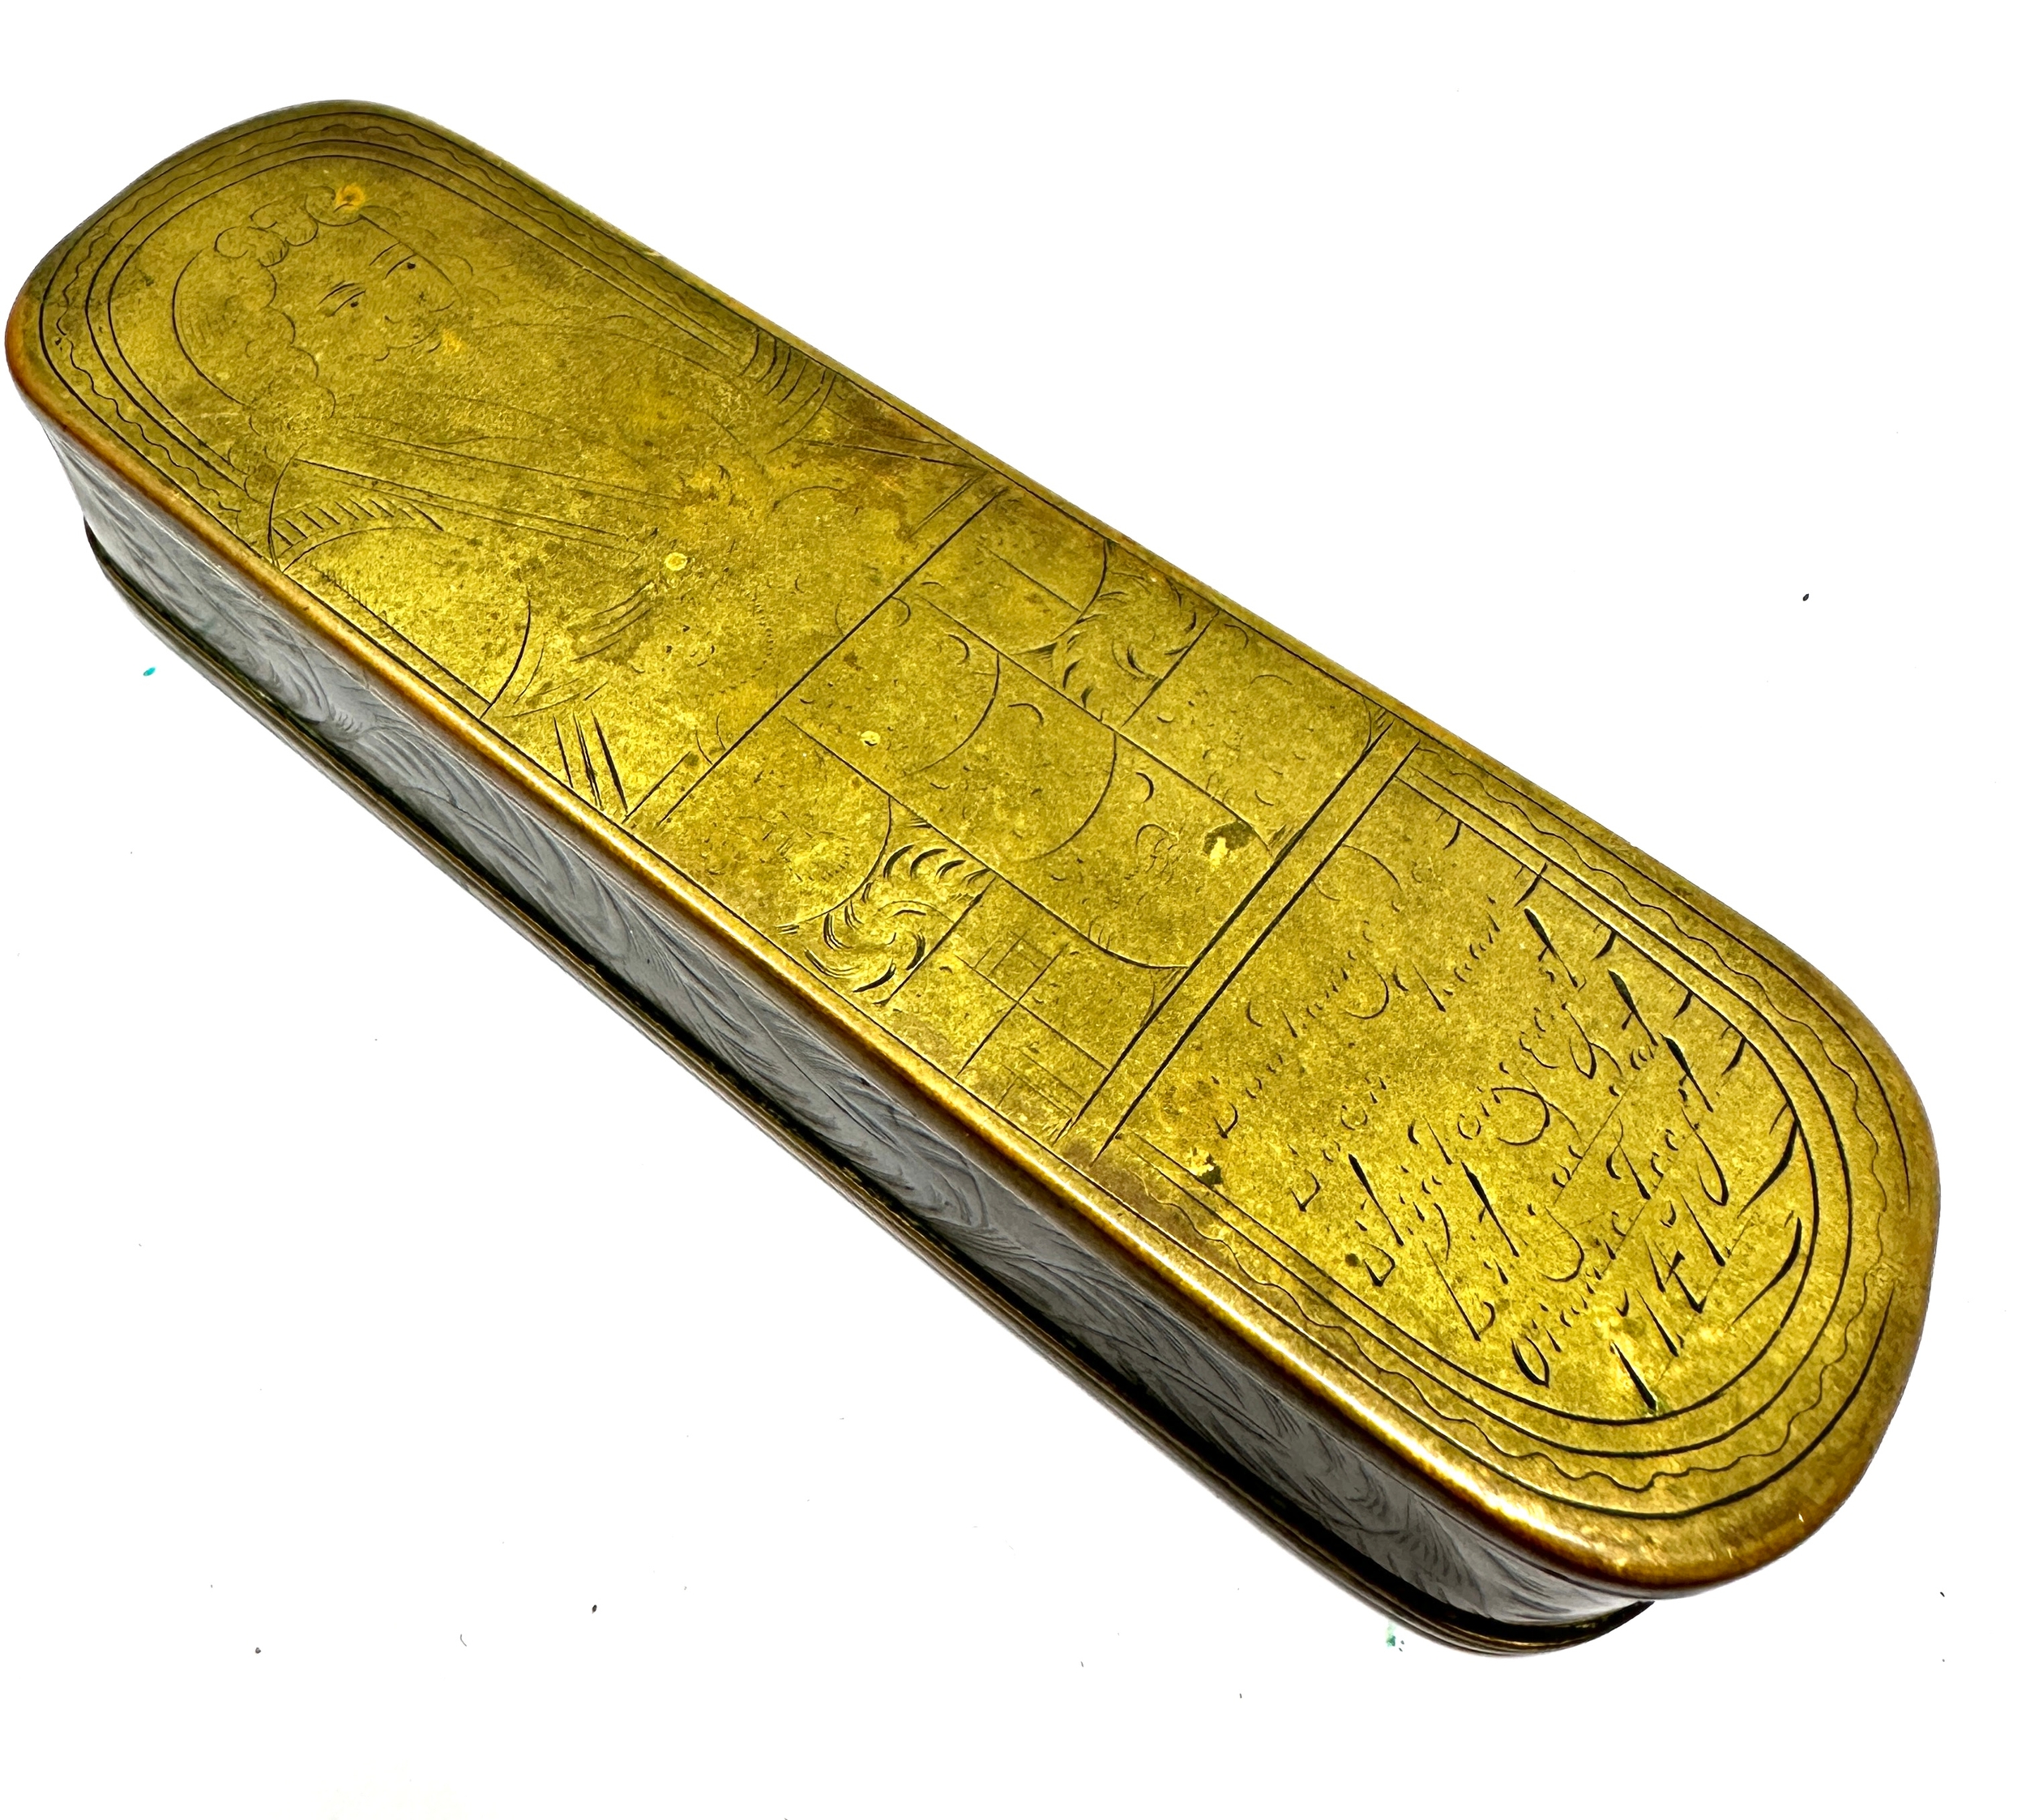 An 18th century Dutch brass tobacco box engraved dated 1747 - Image 3 of 4